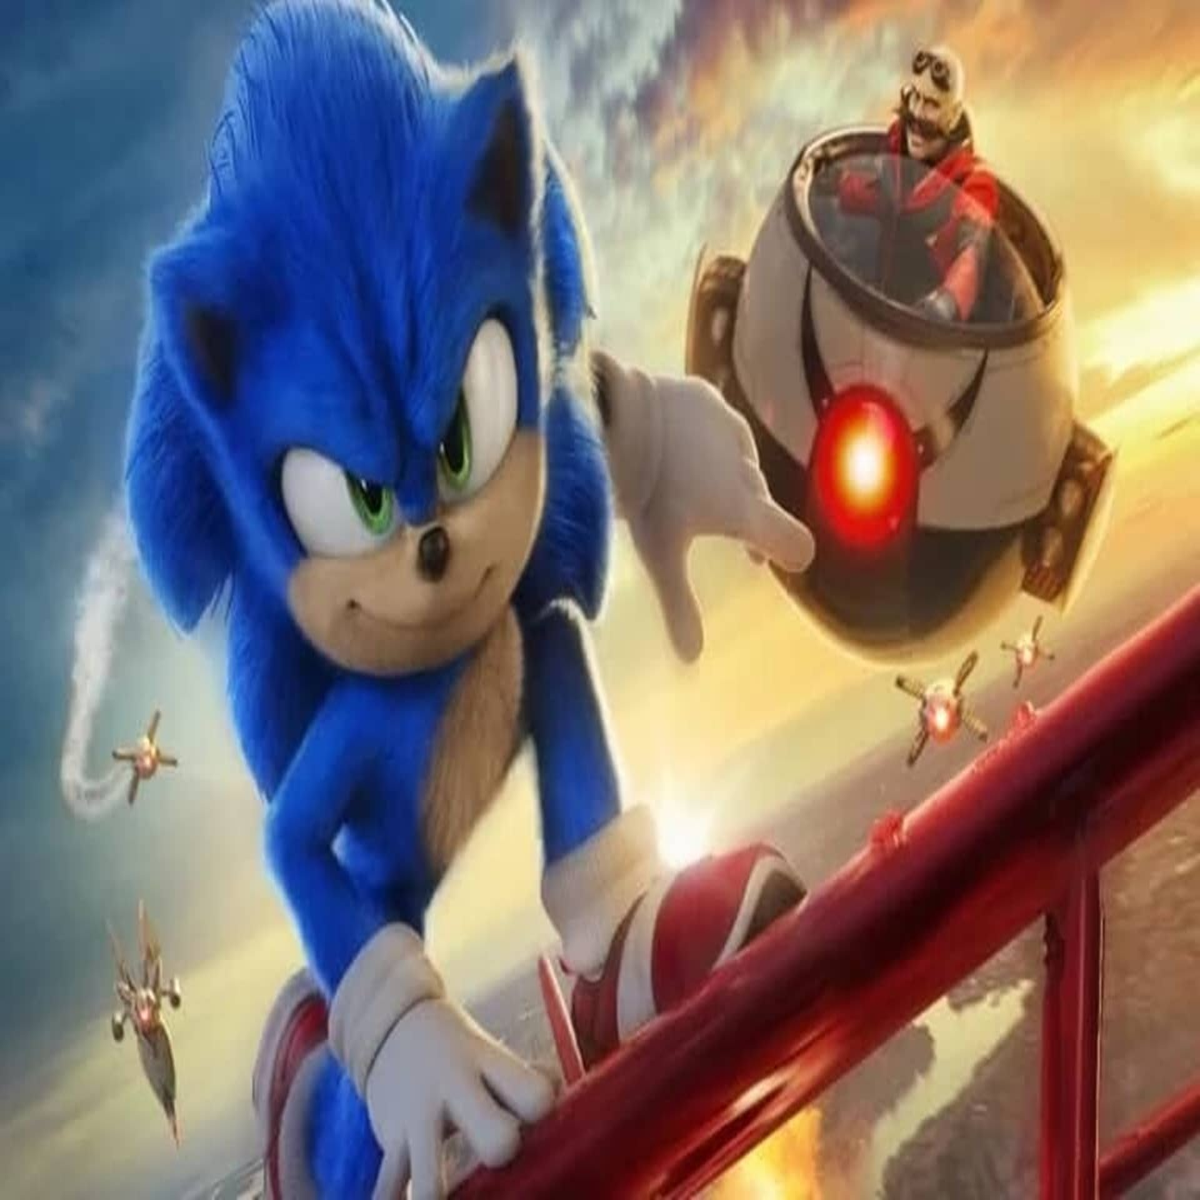 Sonic the Hedgehog 2' cements Sonic's new family